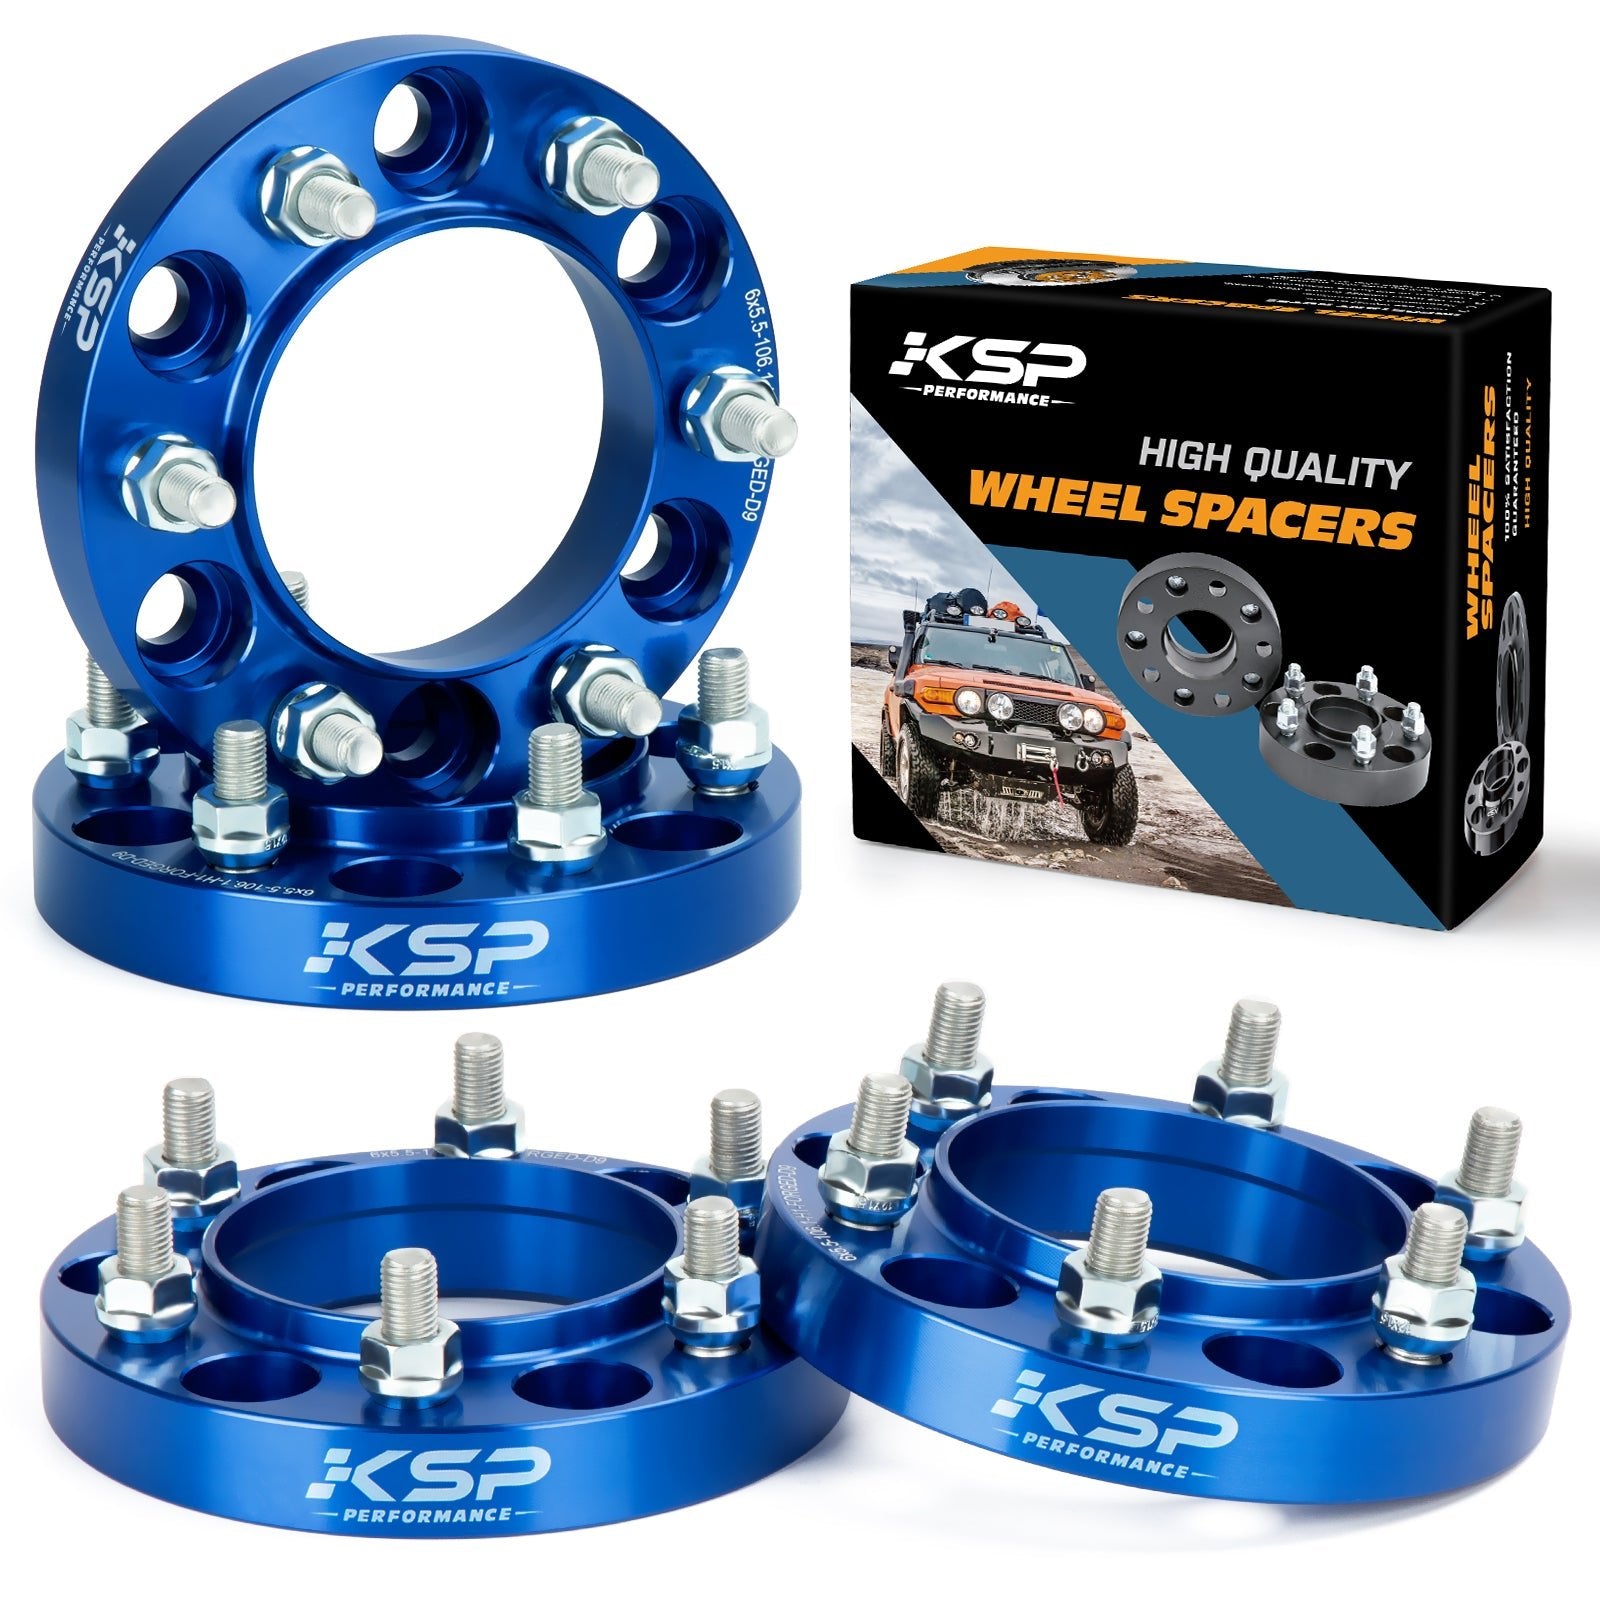 Wheel Spacers 1 inch 6x5.5" Hubcentric For Toyota Tacoma 4Runner Tundra FJ Cruiser Blue xccscss.